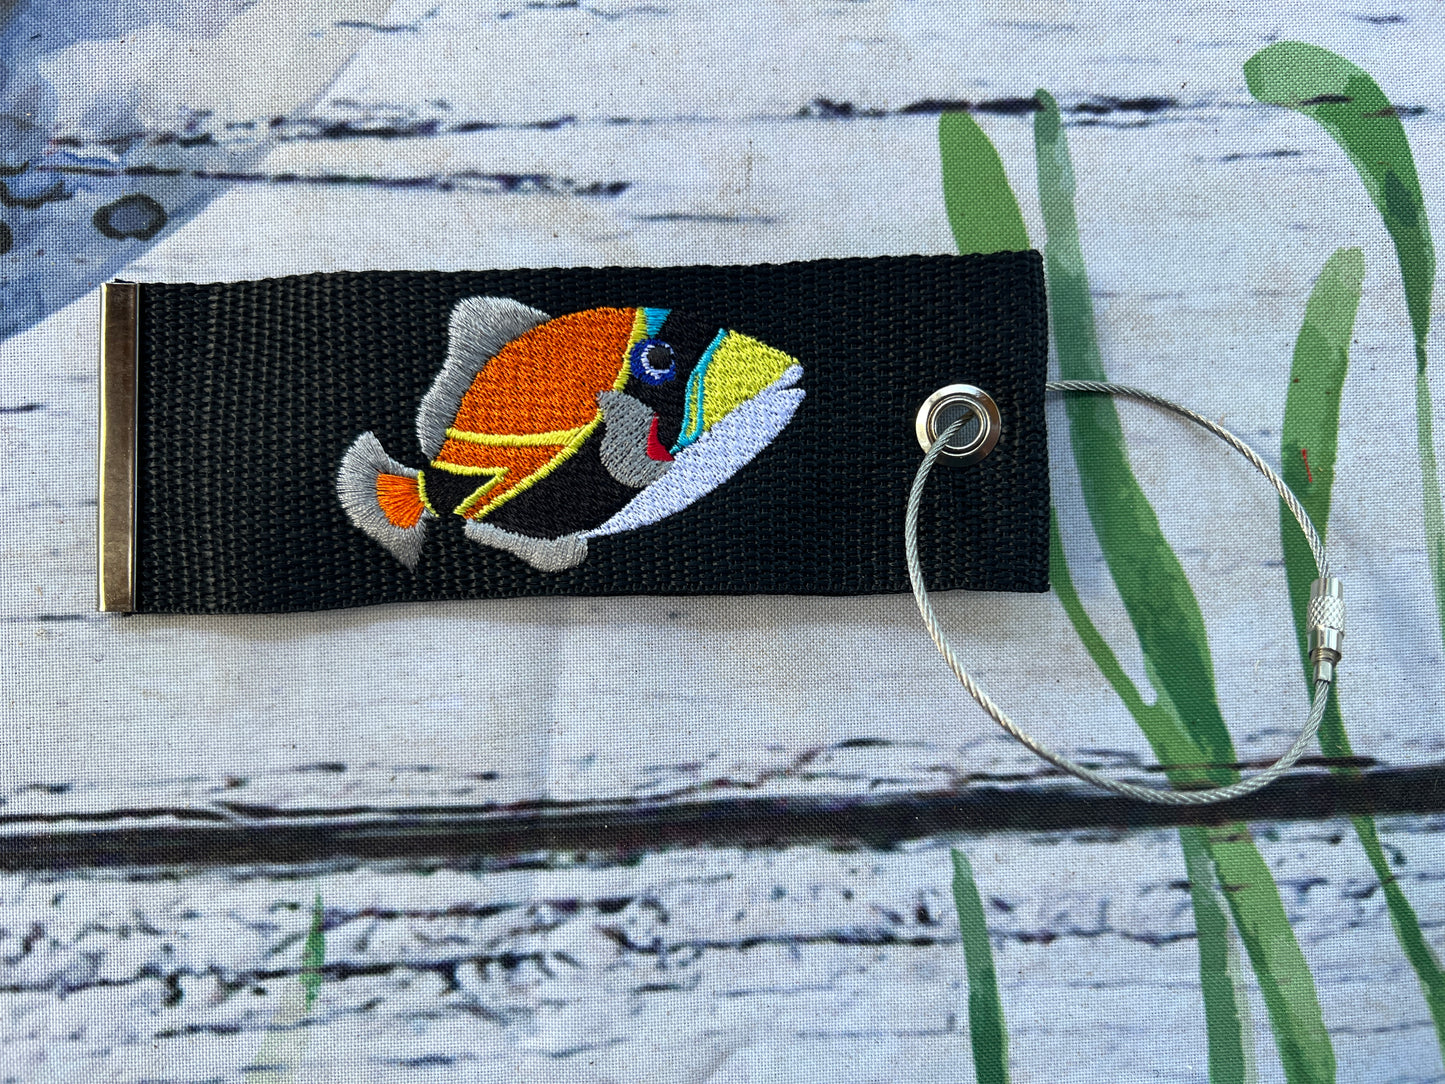 Humuhumunukunukuapua'a (Hawaii's State Fish) Luggage Tag, Personalized Embroidered Bag Tag for all your Travel needs